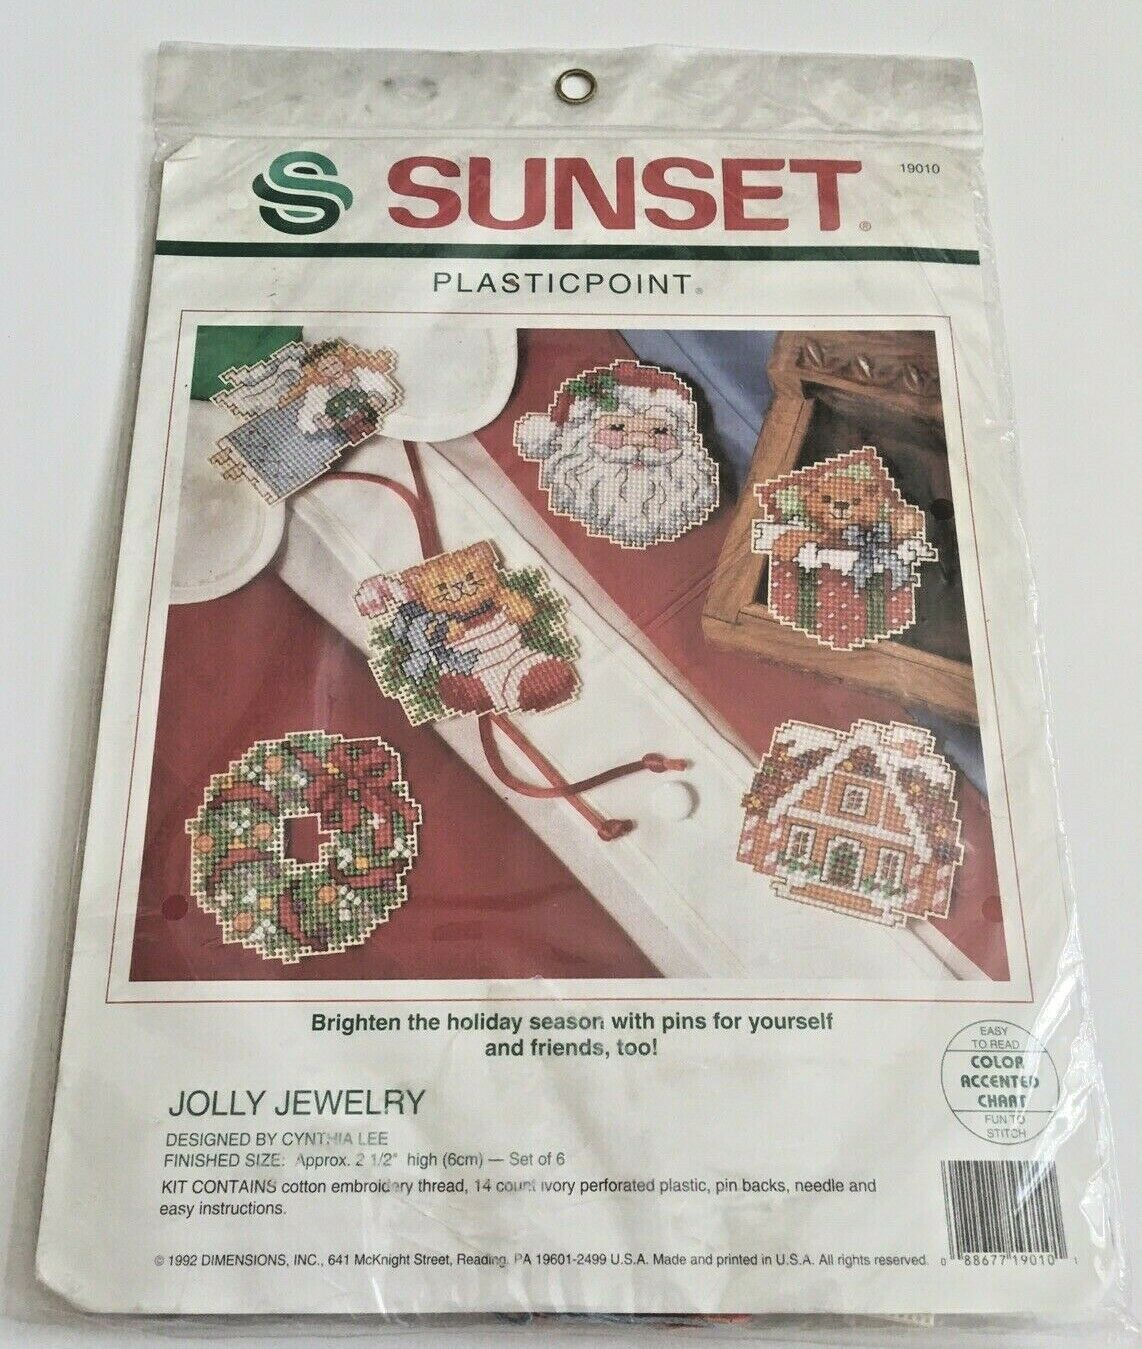 Primary image for Jolly Jewelry Christmas Needlepoint Sunset Plasticpoint Kit Pin Making Vintage 